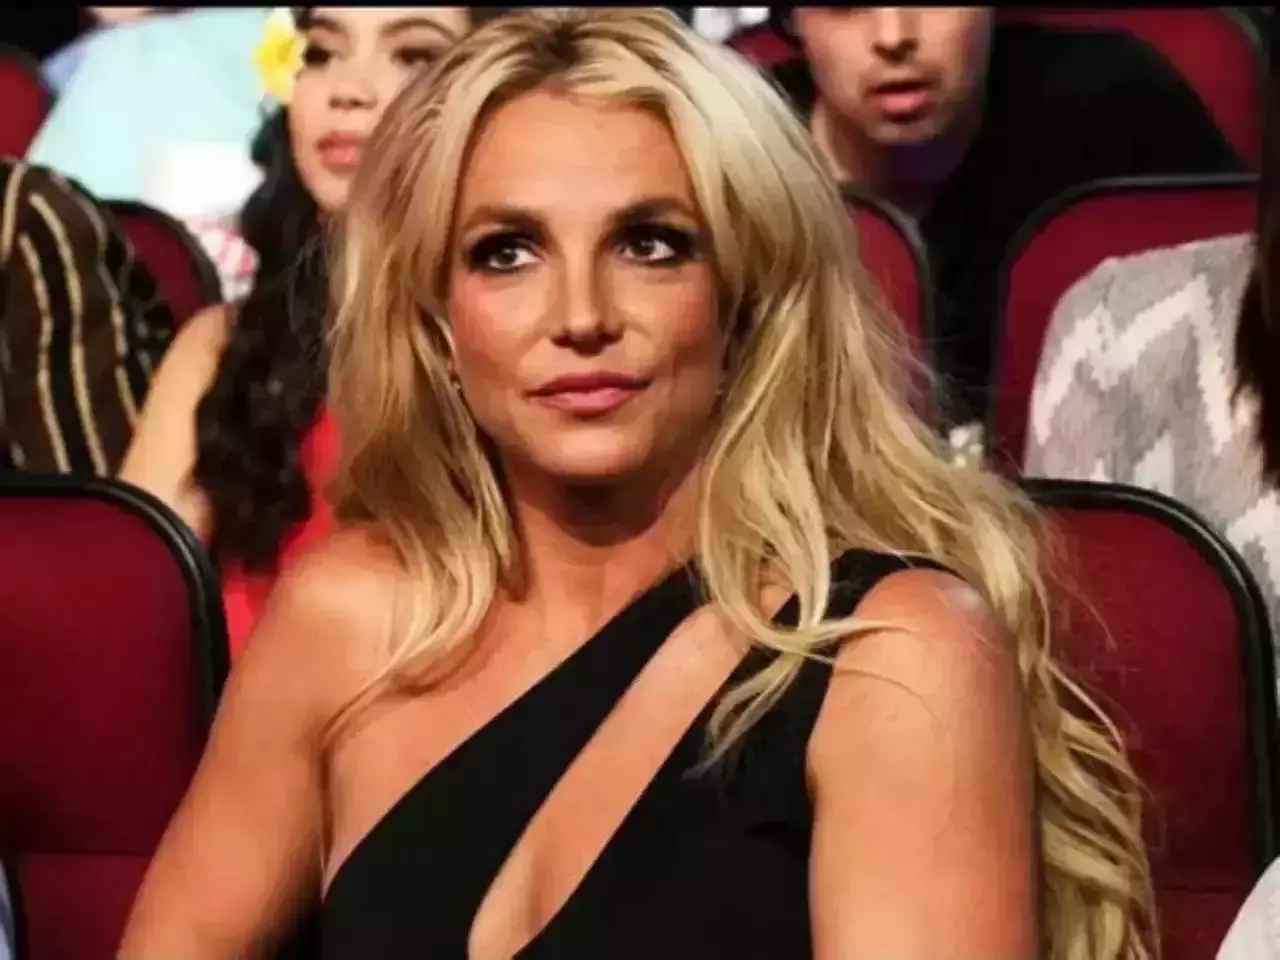 Pop star Britney Spears says she was struck by Victor Wembnyama’s security